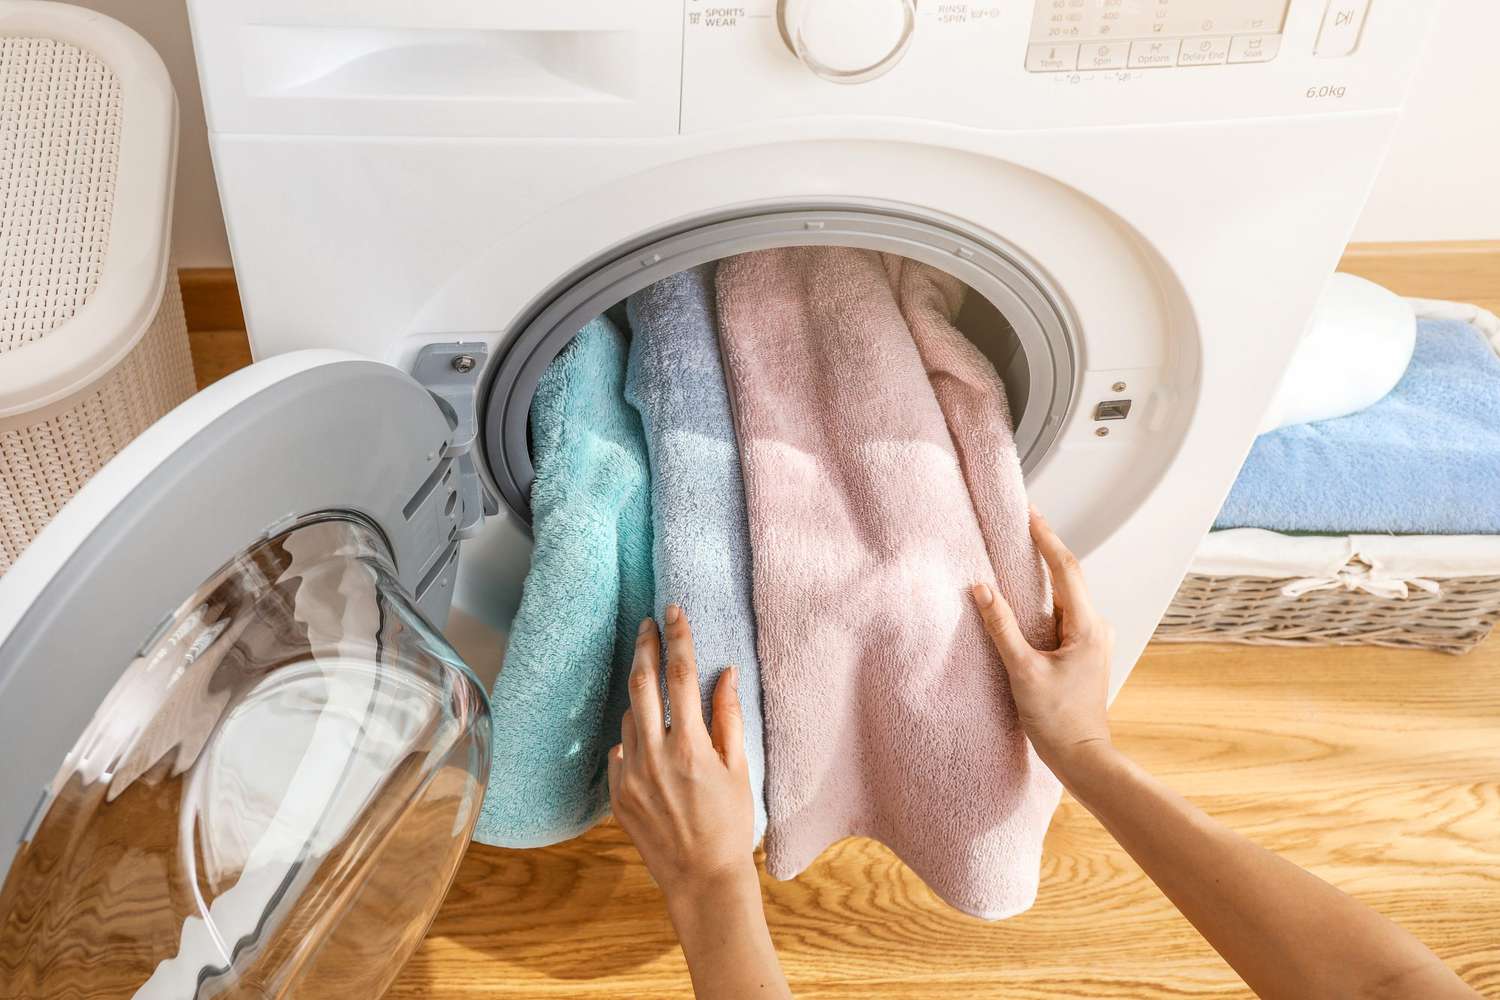 Should You Wash Towels In Hot Water?